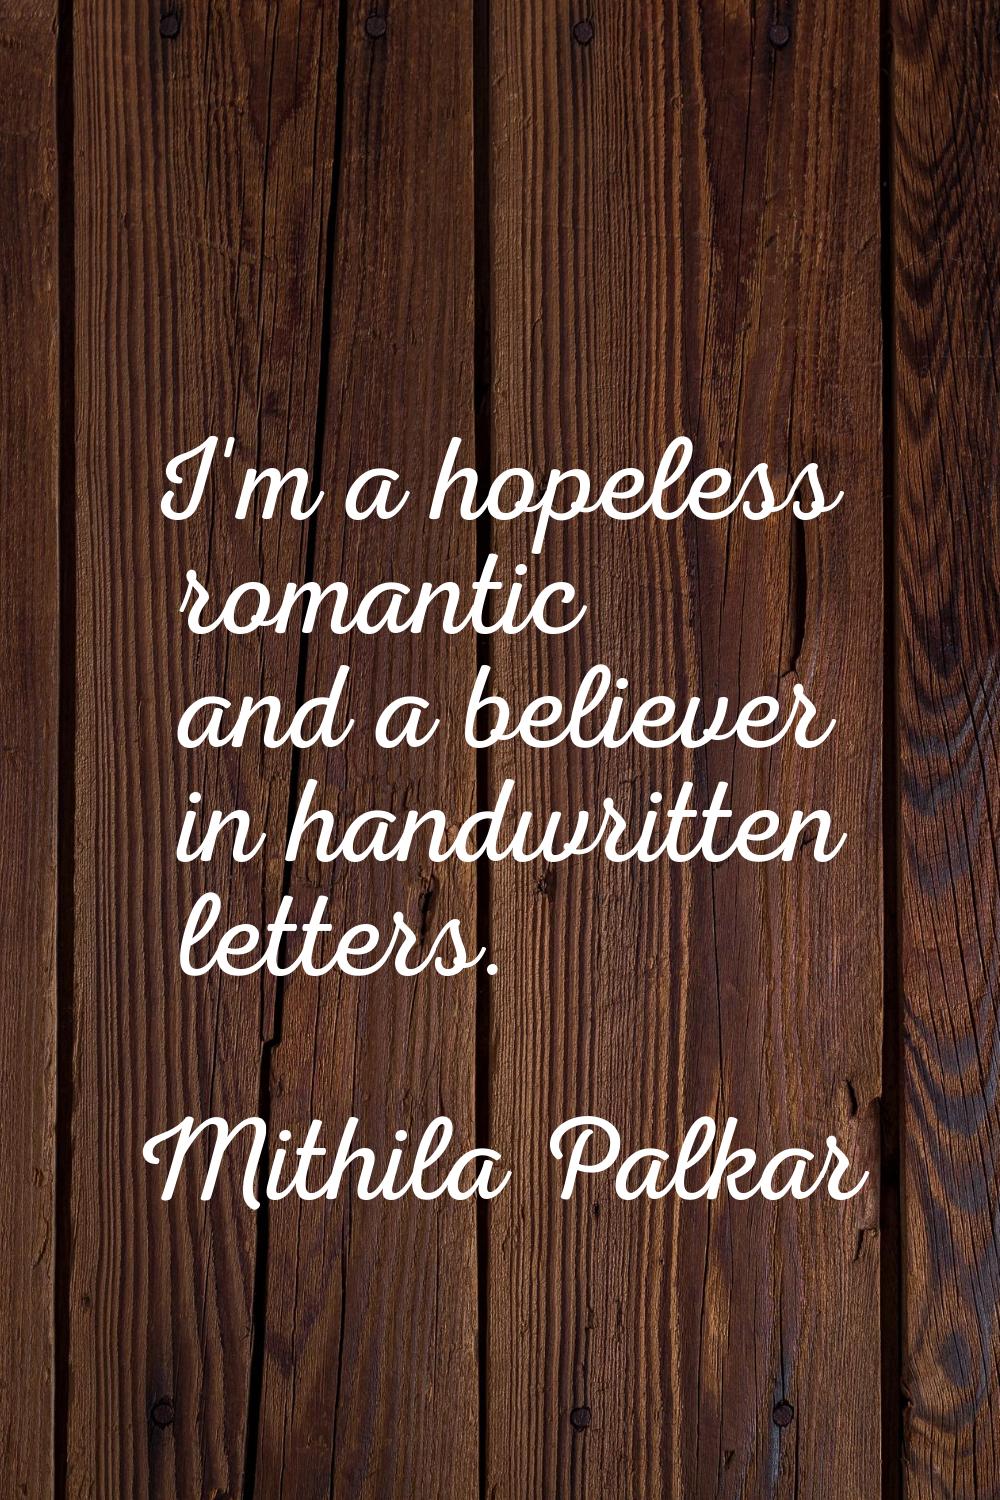 I'm a hopeless romantic and a believer in handwritten letters.